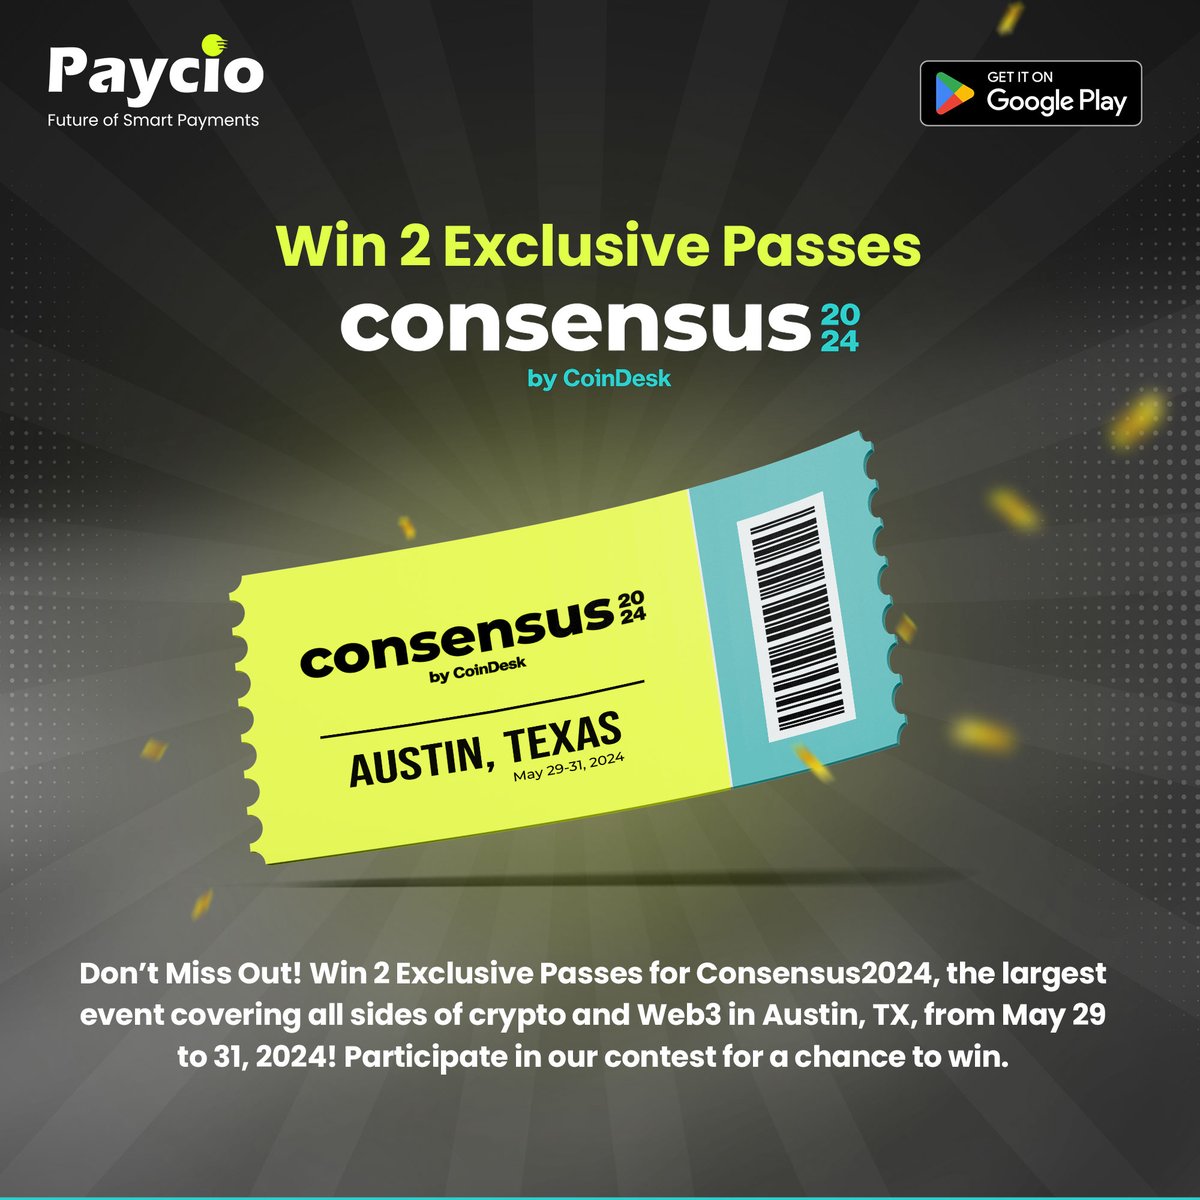 Hey, #Paycio Crew! We've got something amazing for you! We have 2 exclusive passes for #Consensus2024, the world's premier #cryptocurrency, #blockchain, and #web3 gathering, which will be held in Austin, Texas, 𝗳𝗿𝗼𝗺 𝗠𝗮𝘆 𝟮𝟵 𝘁𝗼 𝟯𝟭, 𝟮𝟬𝟮𝟰! 𝐇𝐨𝐰 𝐭𝐨 𝐄𝐧𝐭𝐞𝐫: